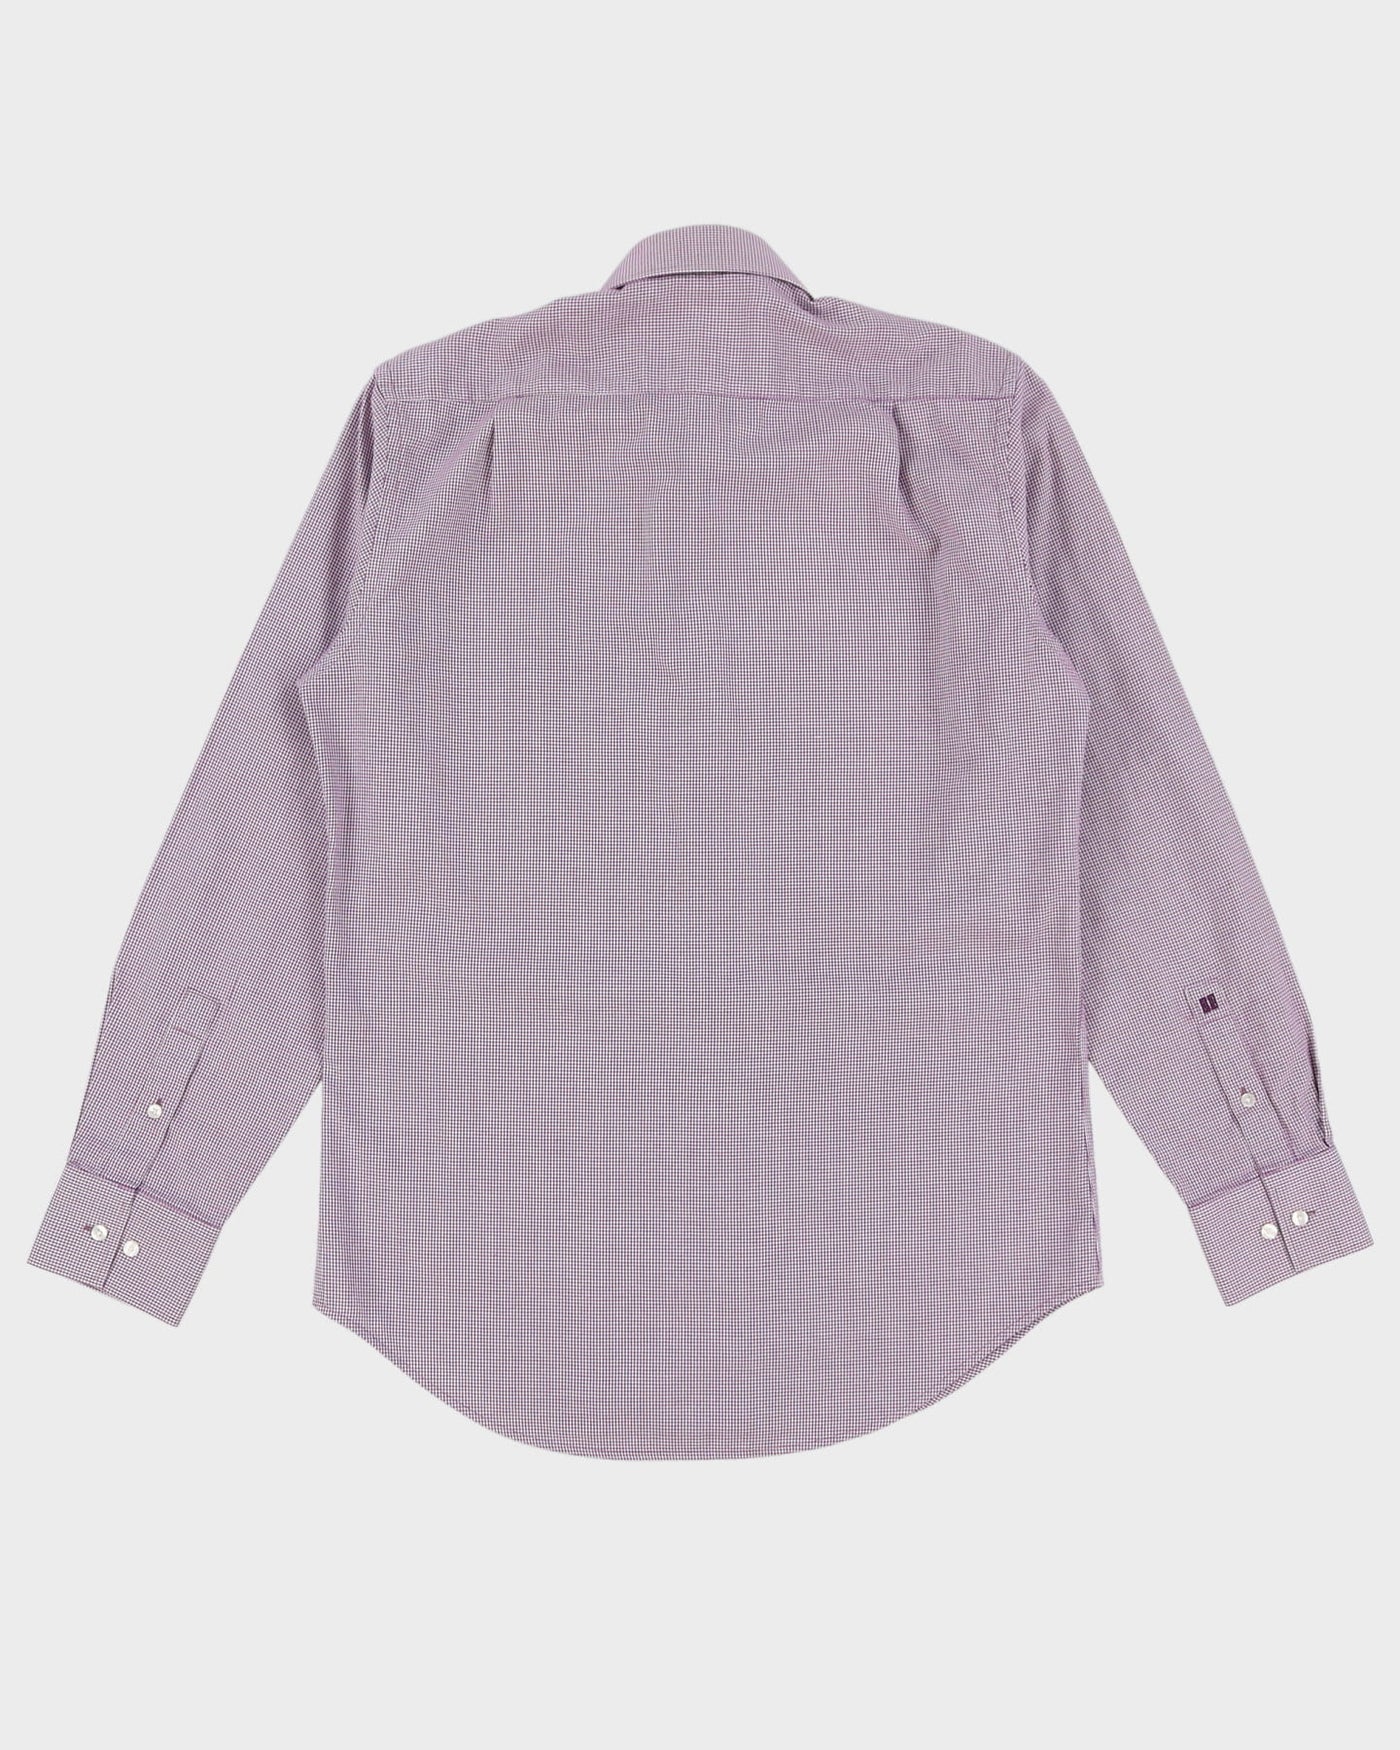 00s Givenchy Purple Patterned Long Sleeve Button Up Shirt - M